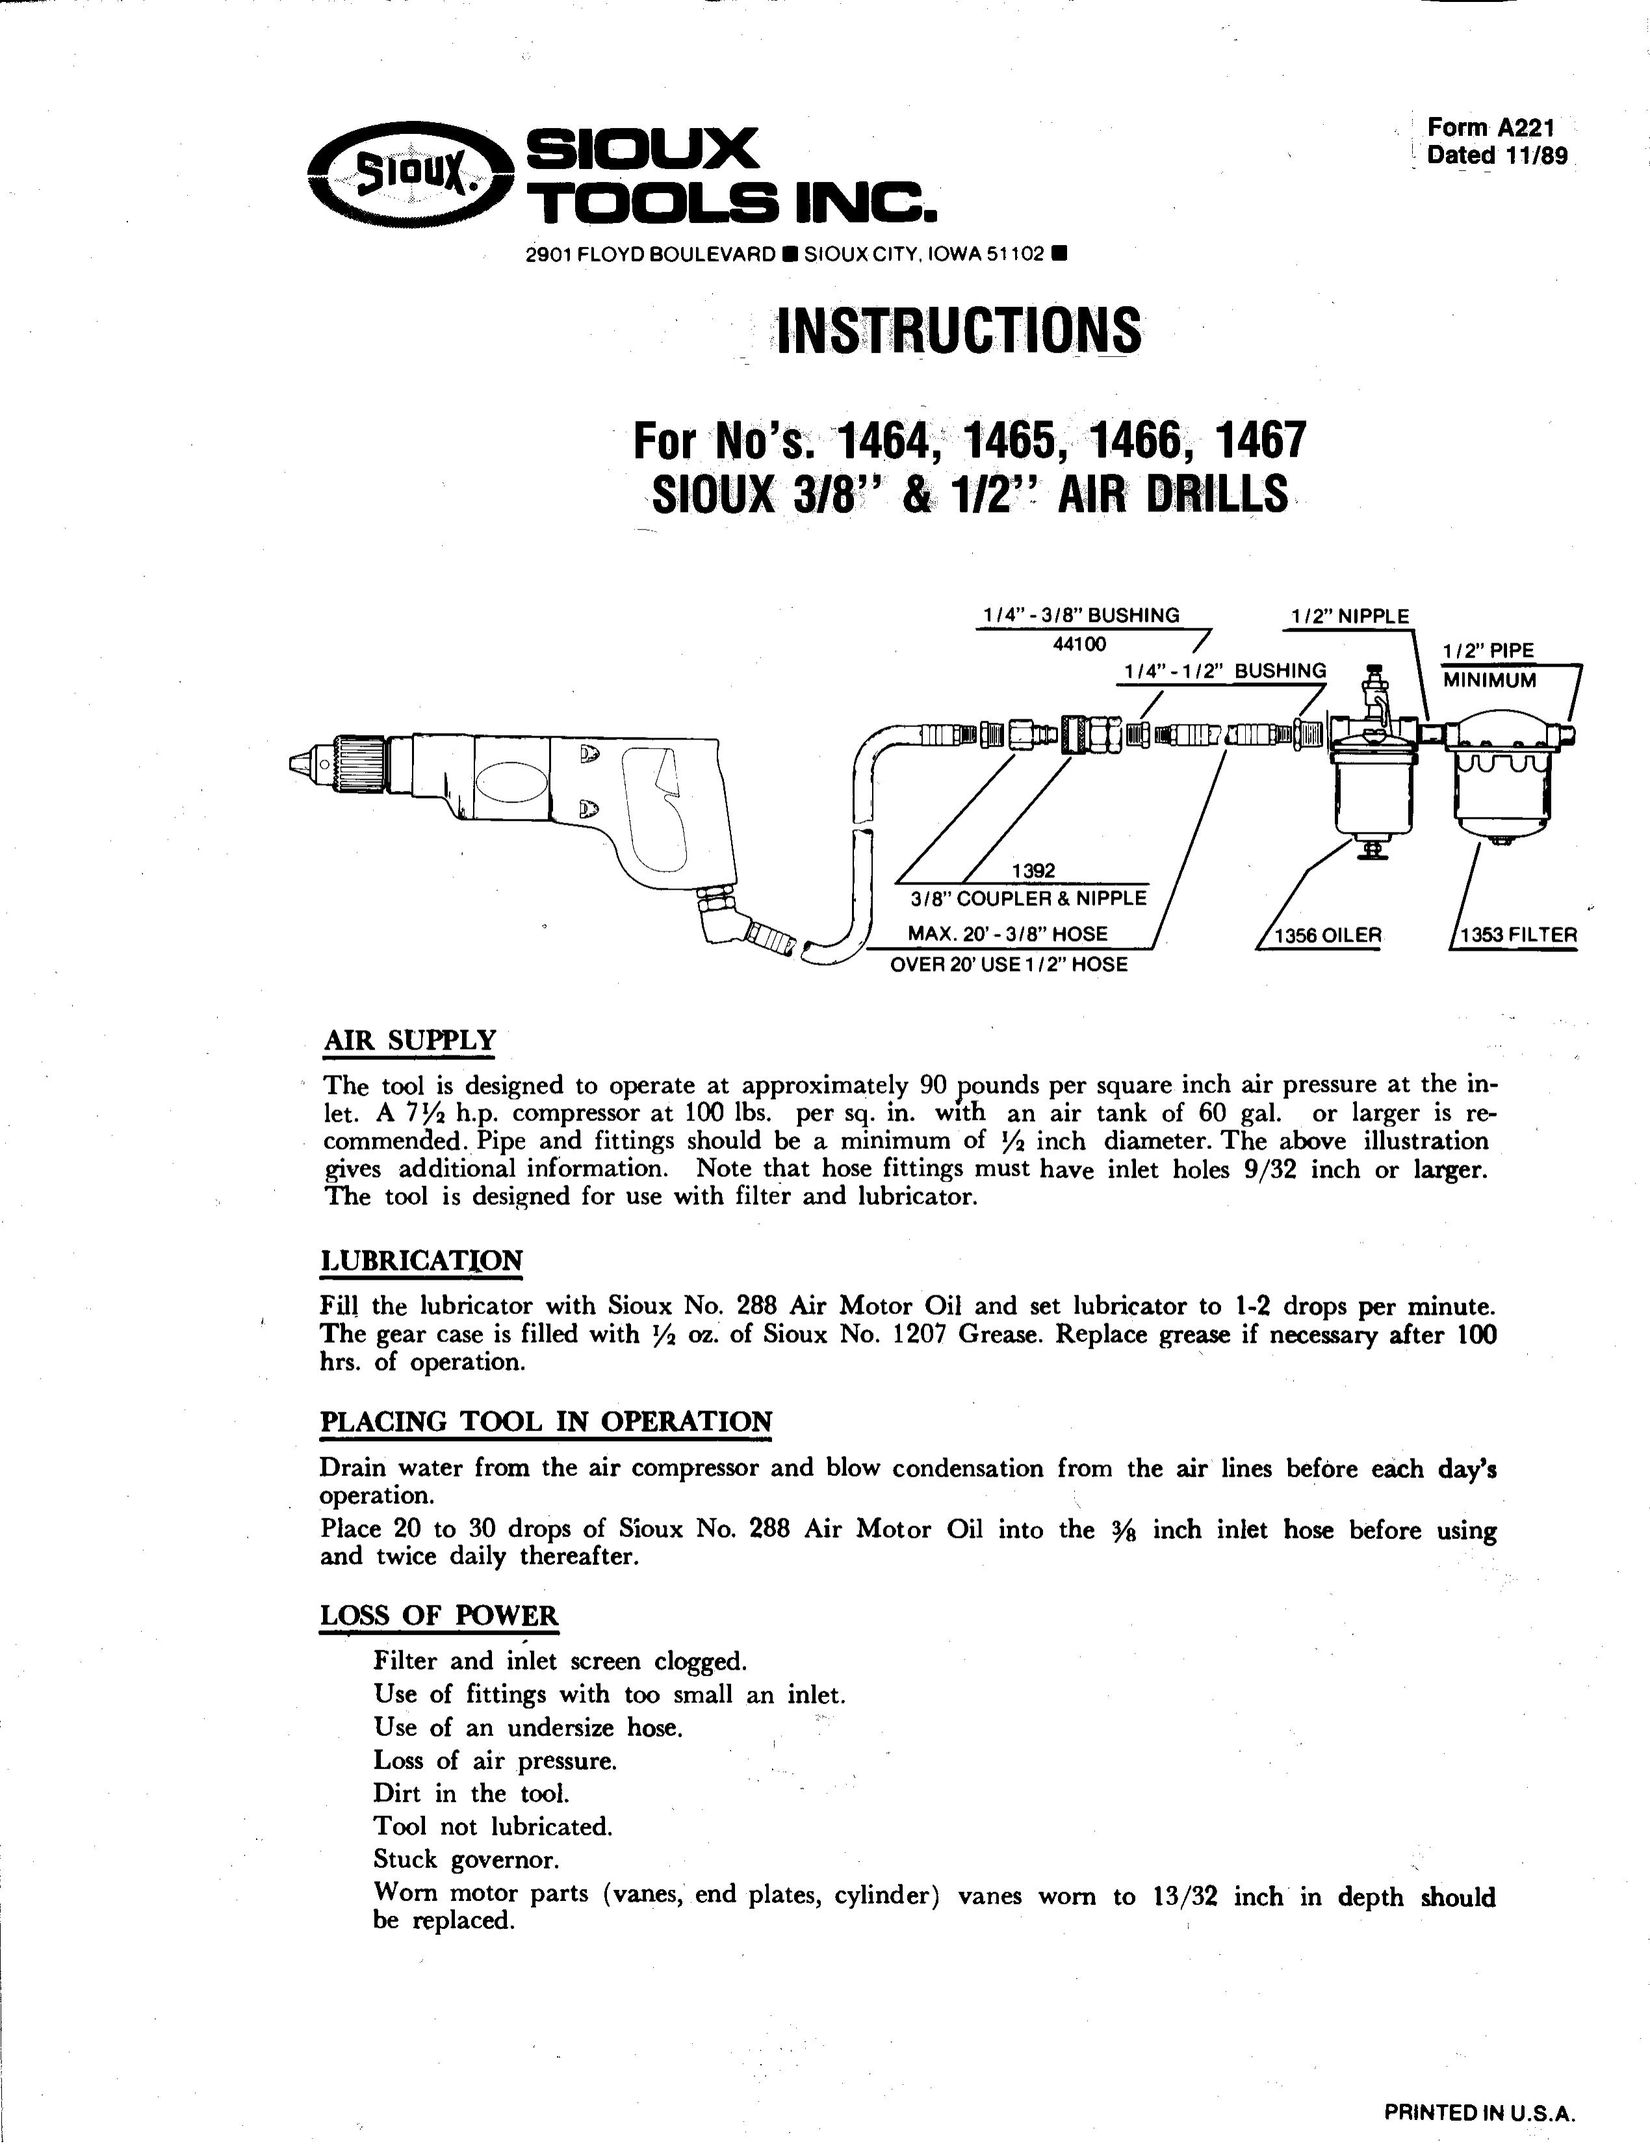 Sioux Tools 1467 Drill User Manual